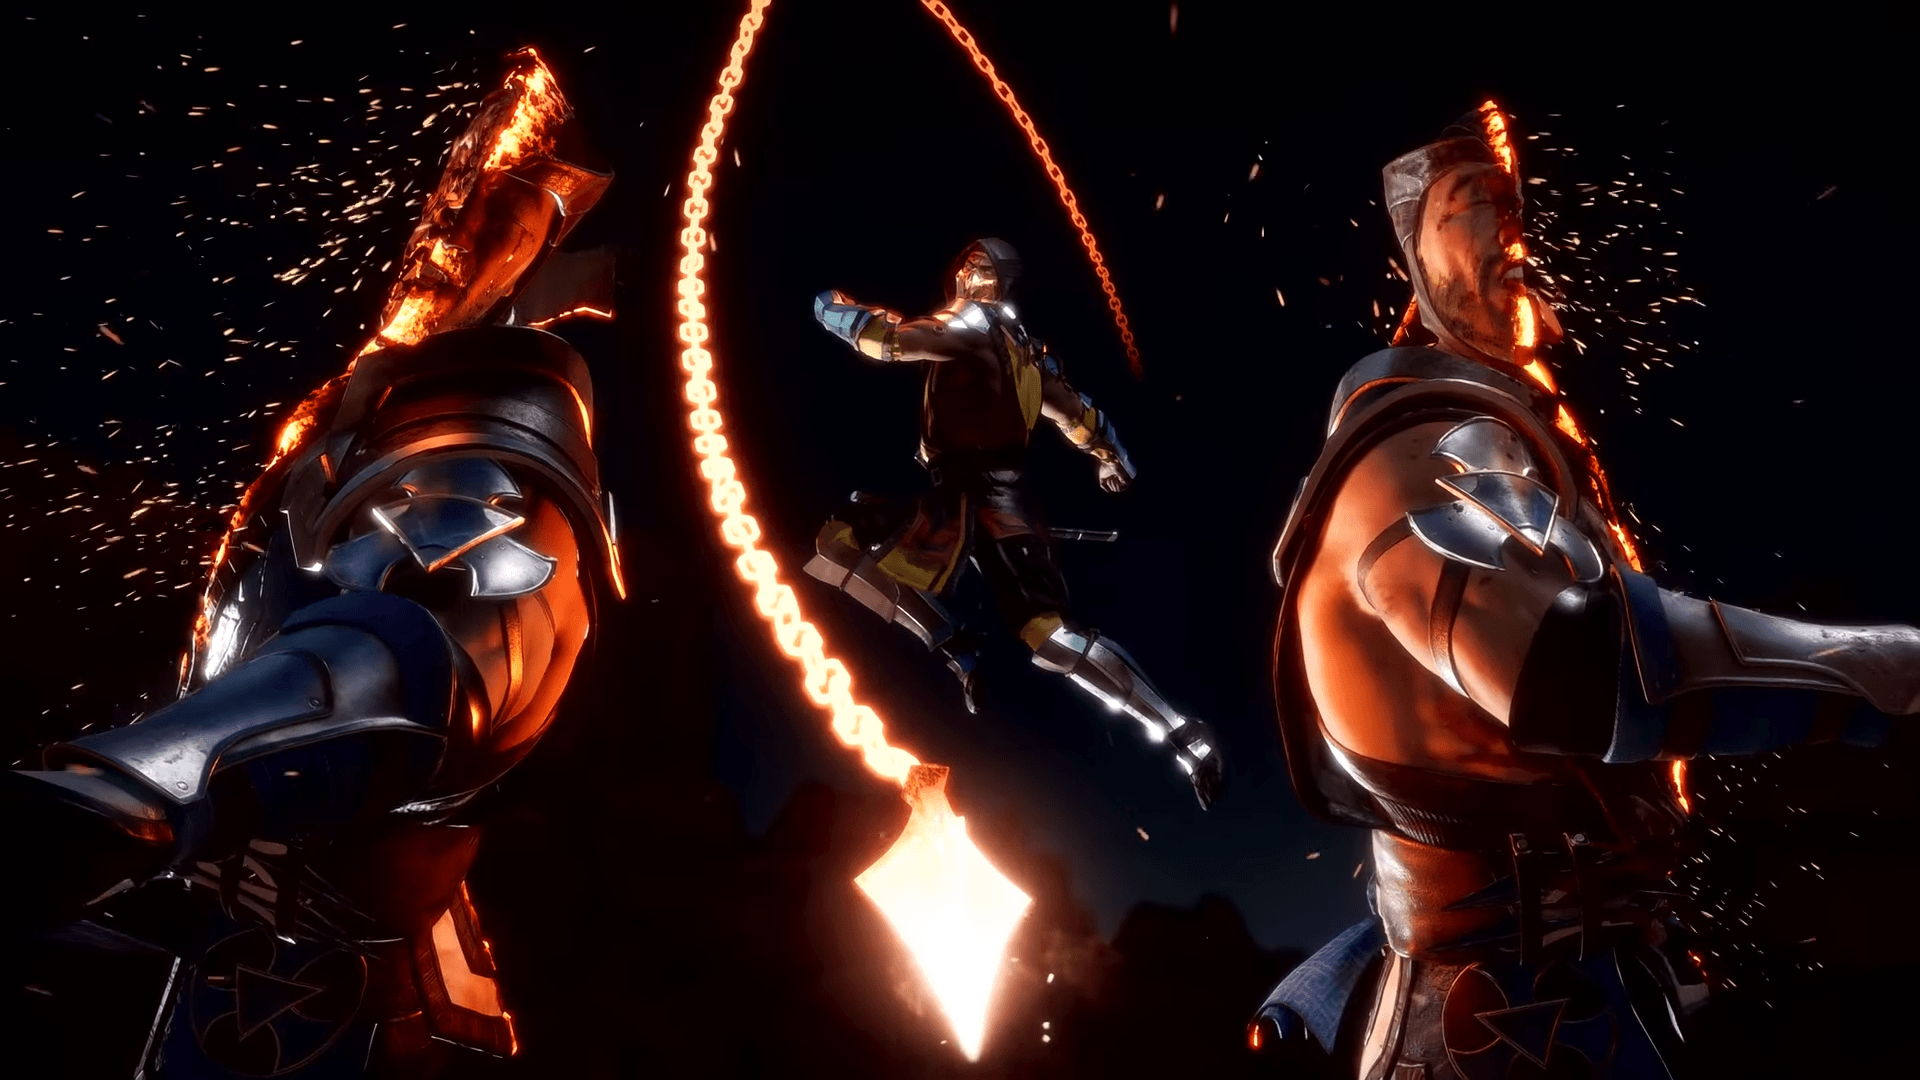 This screenshot I took from Scorpion's fatality is pretty serious